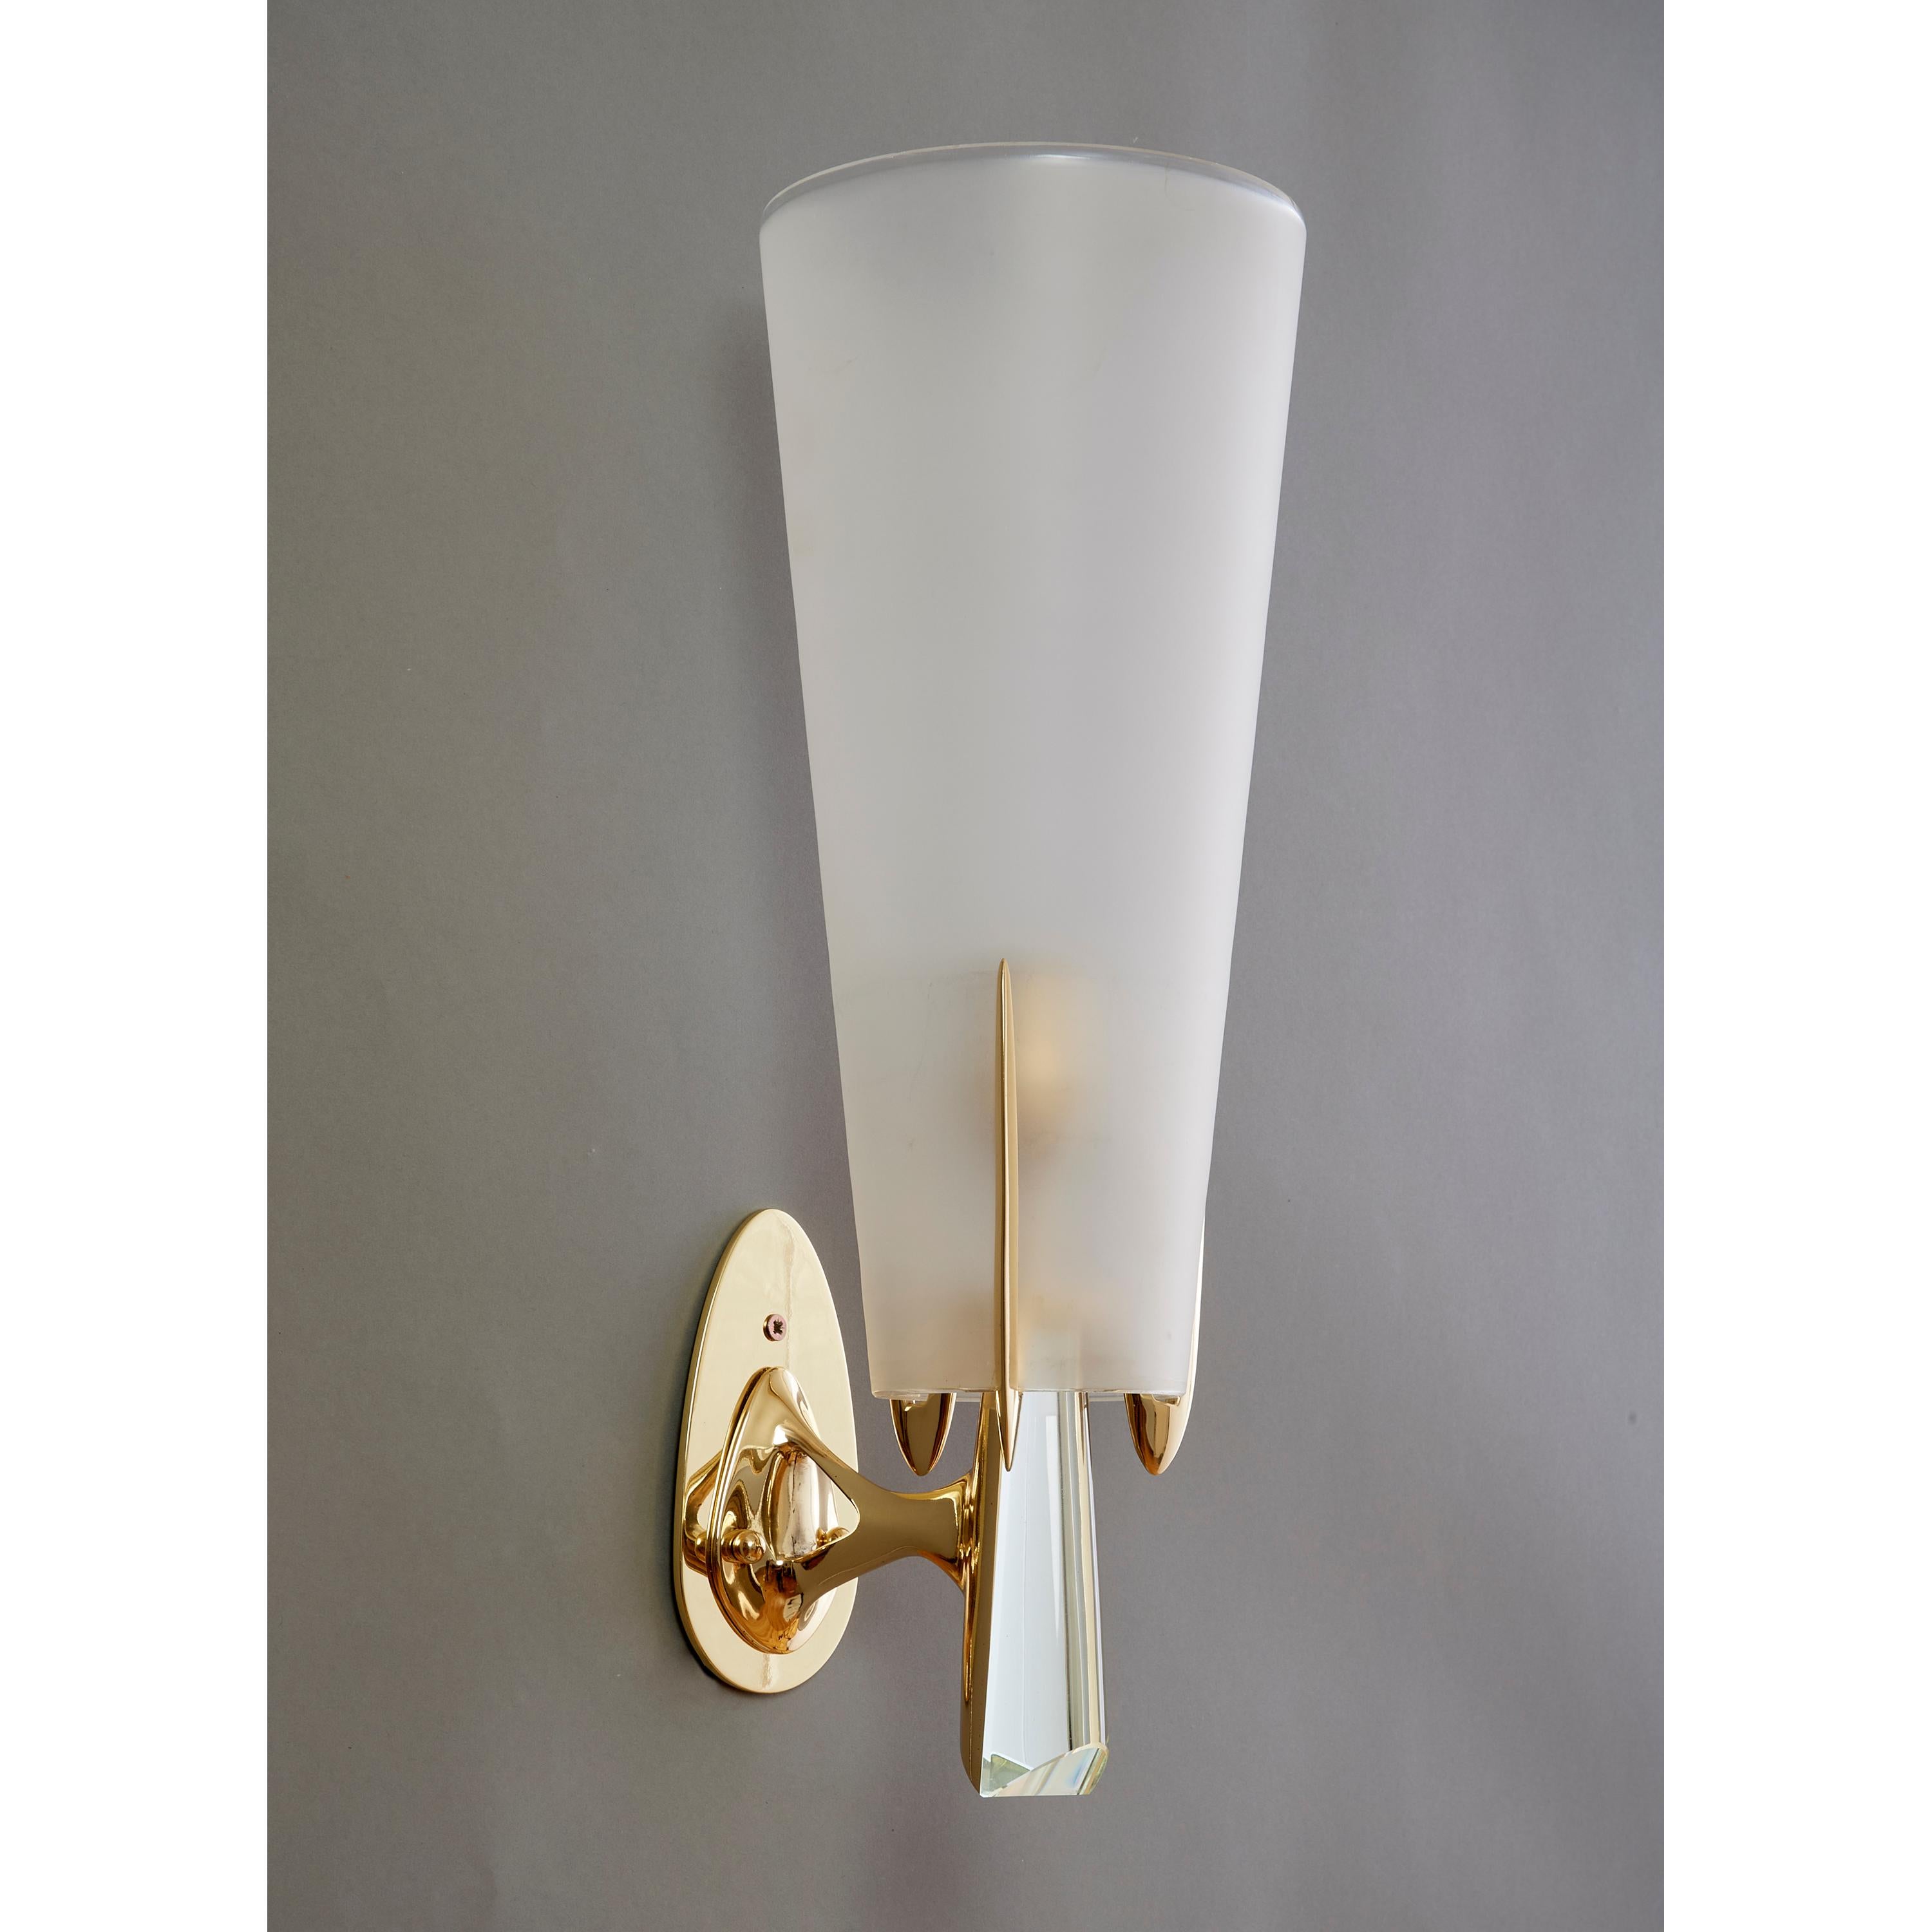 Max Ingrand for Fontana Arte: Rare Sconces in Brass and Crystal, Italy 1955 For Sale 5